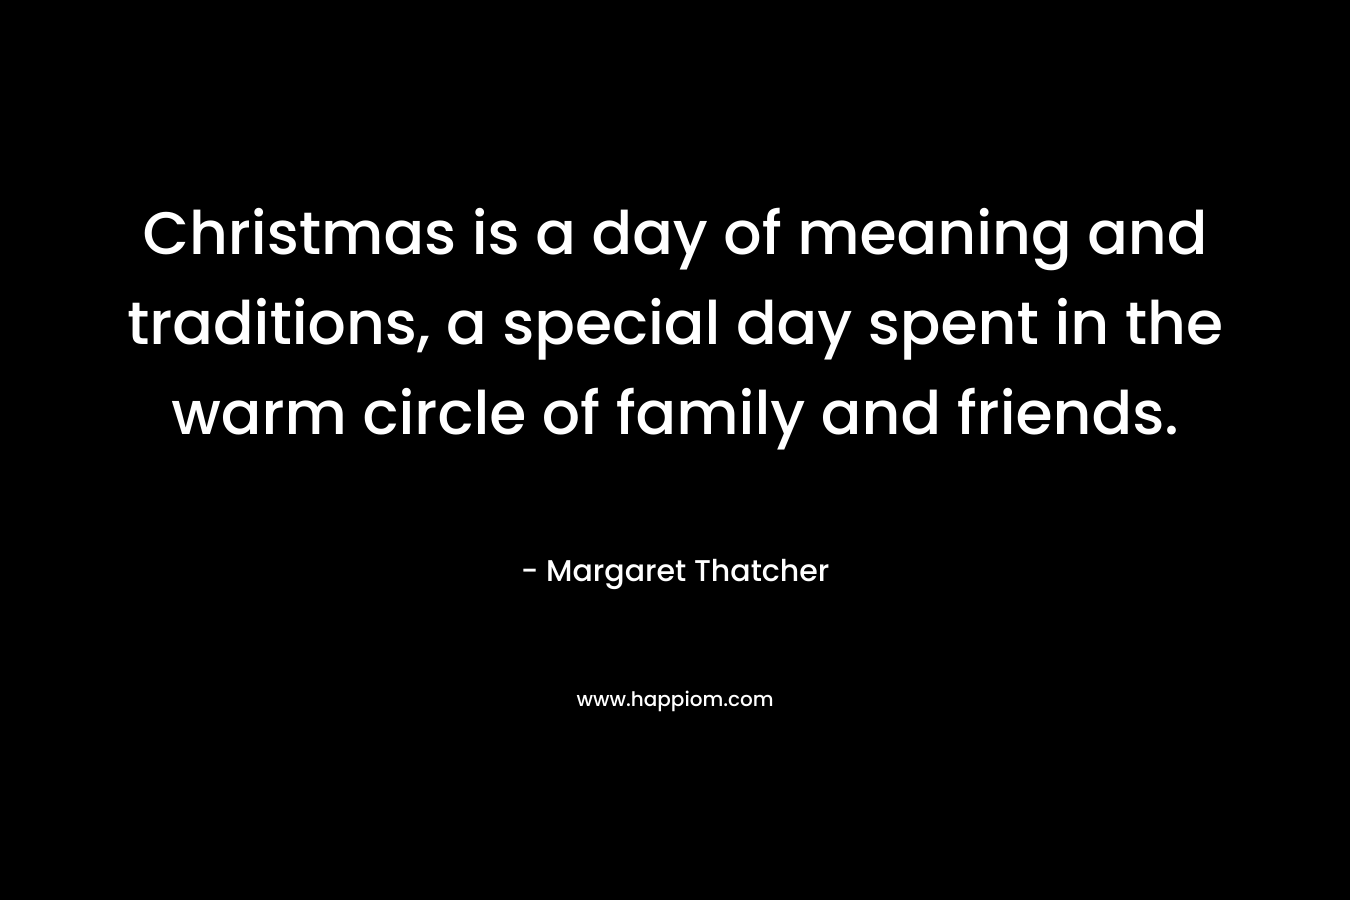 Christmas is a day of meaning and traditions, a special day spent in the warm circle of family and friends. – Margaret Thatcher